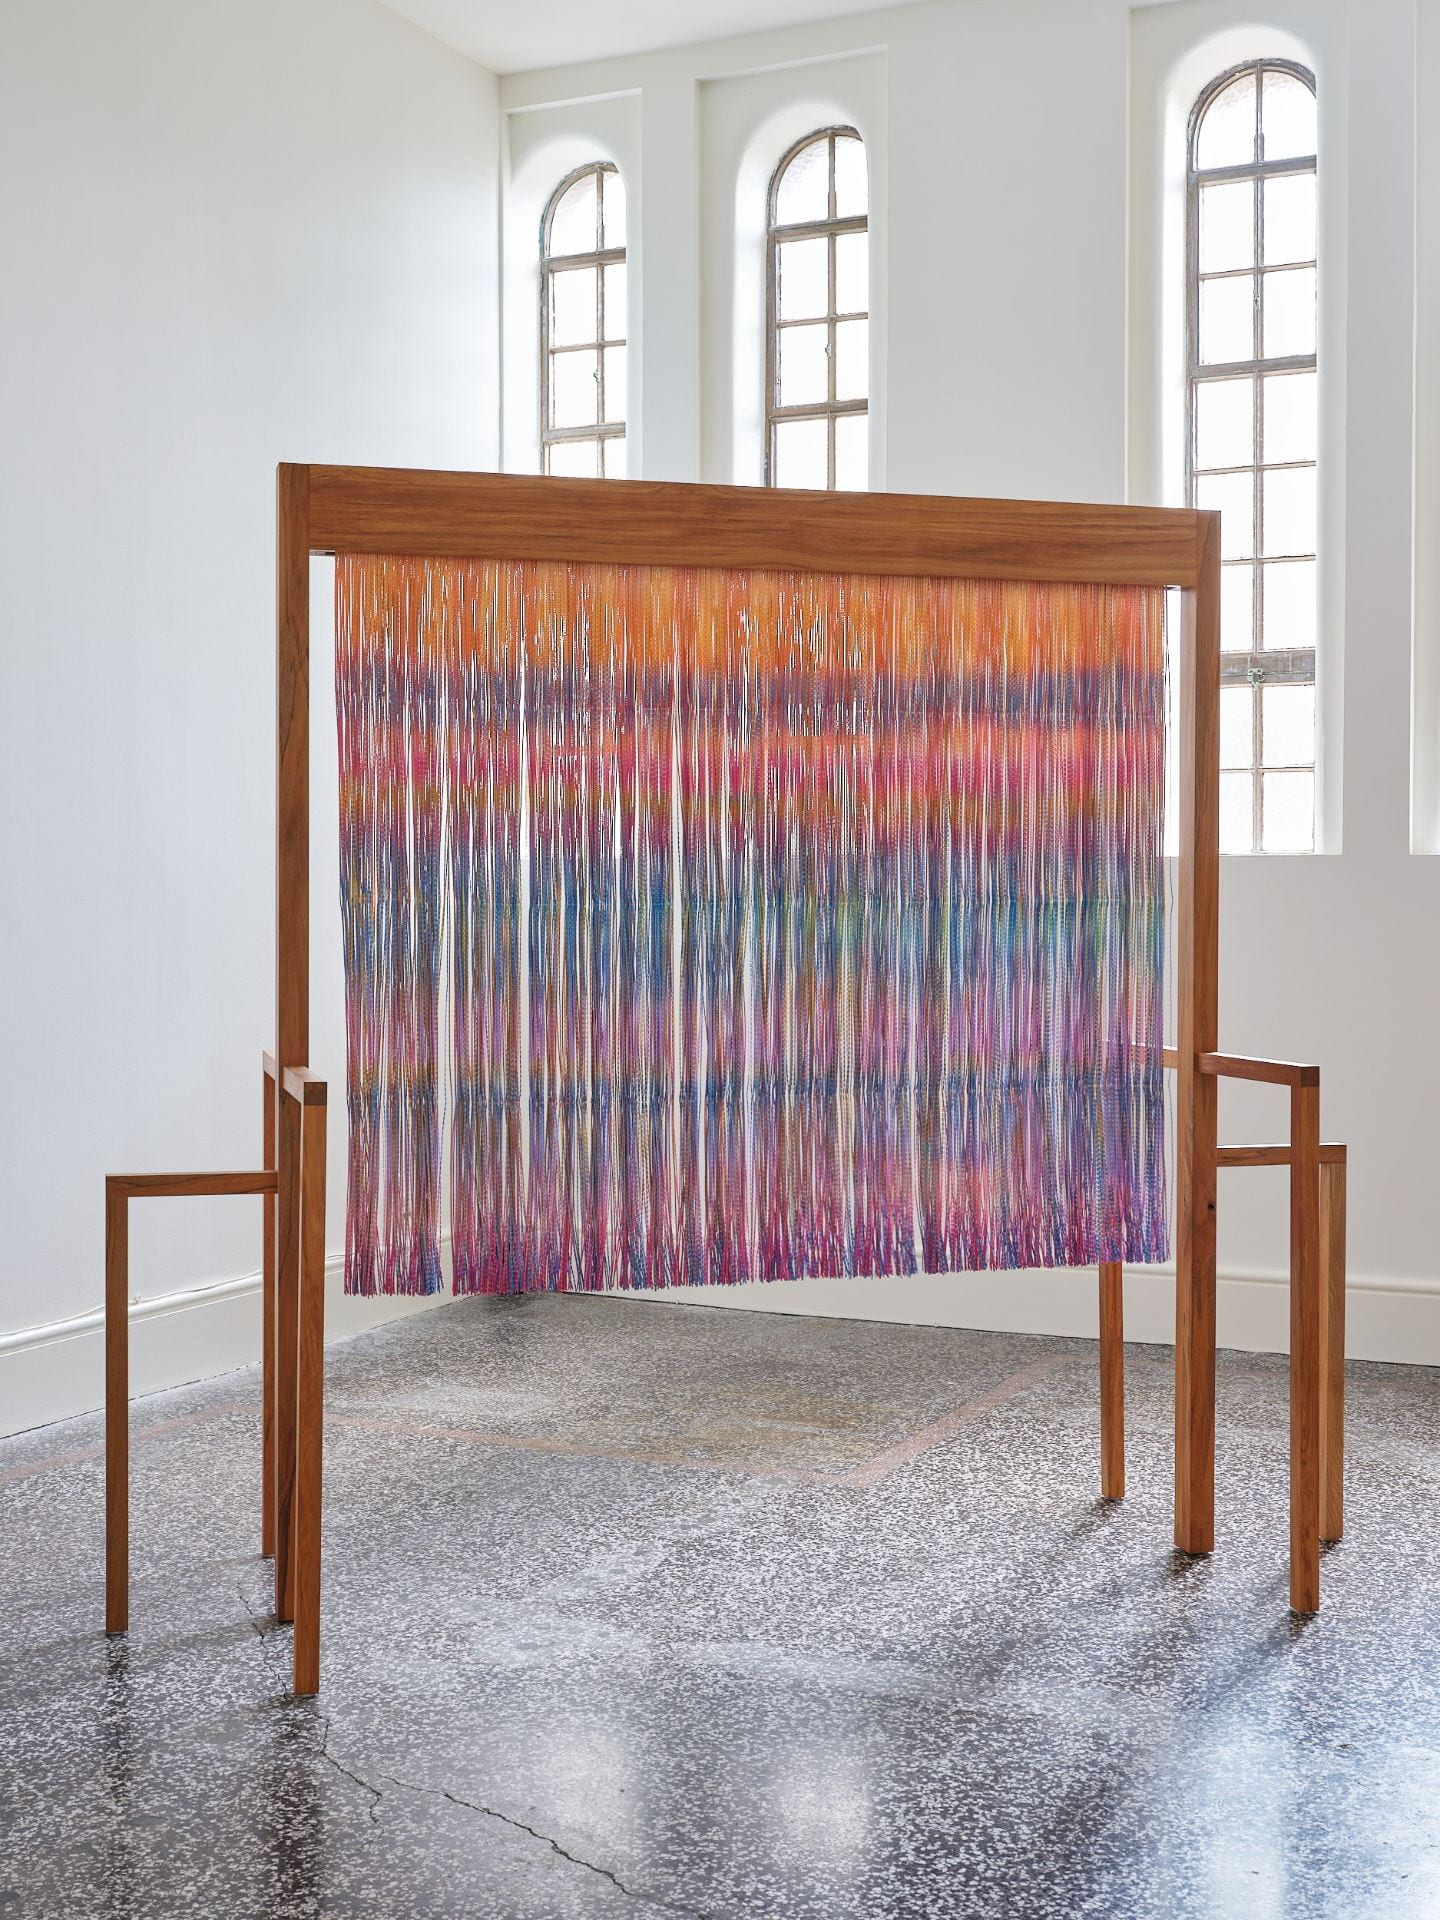 A rectangular wooden structure stands in the centre of a white gallery space. A veil of orange, blues, purples and pinks hangs from the structure. Windows at the back of the room let natural light in.